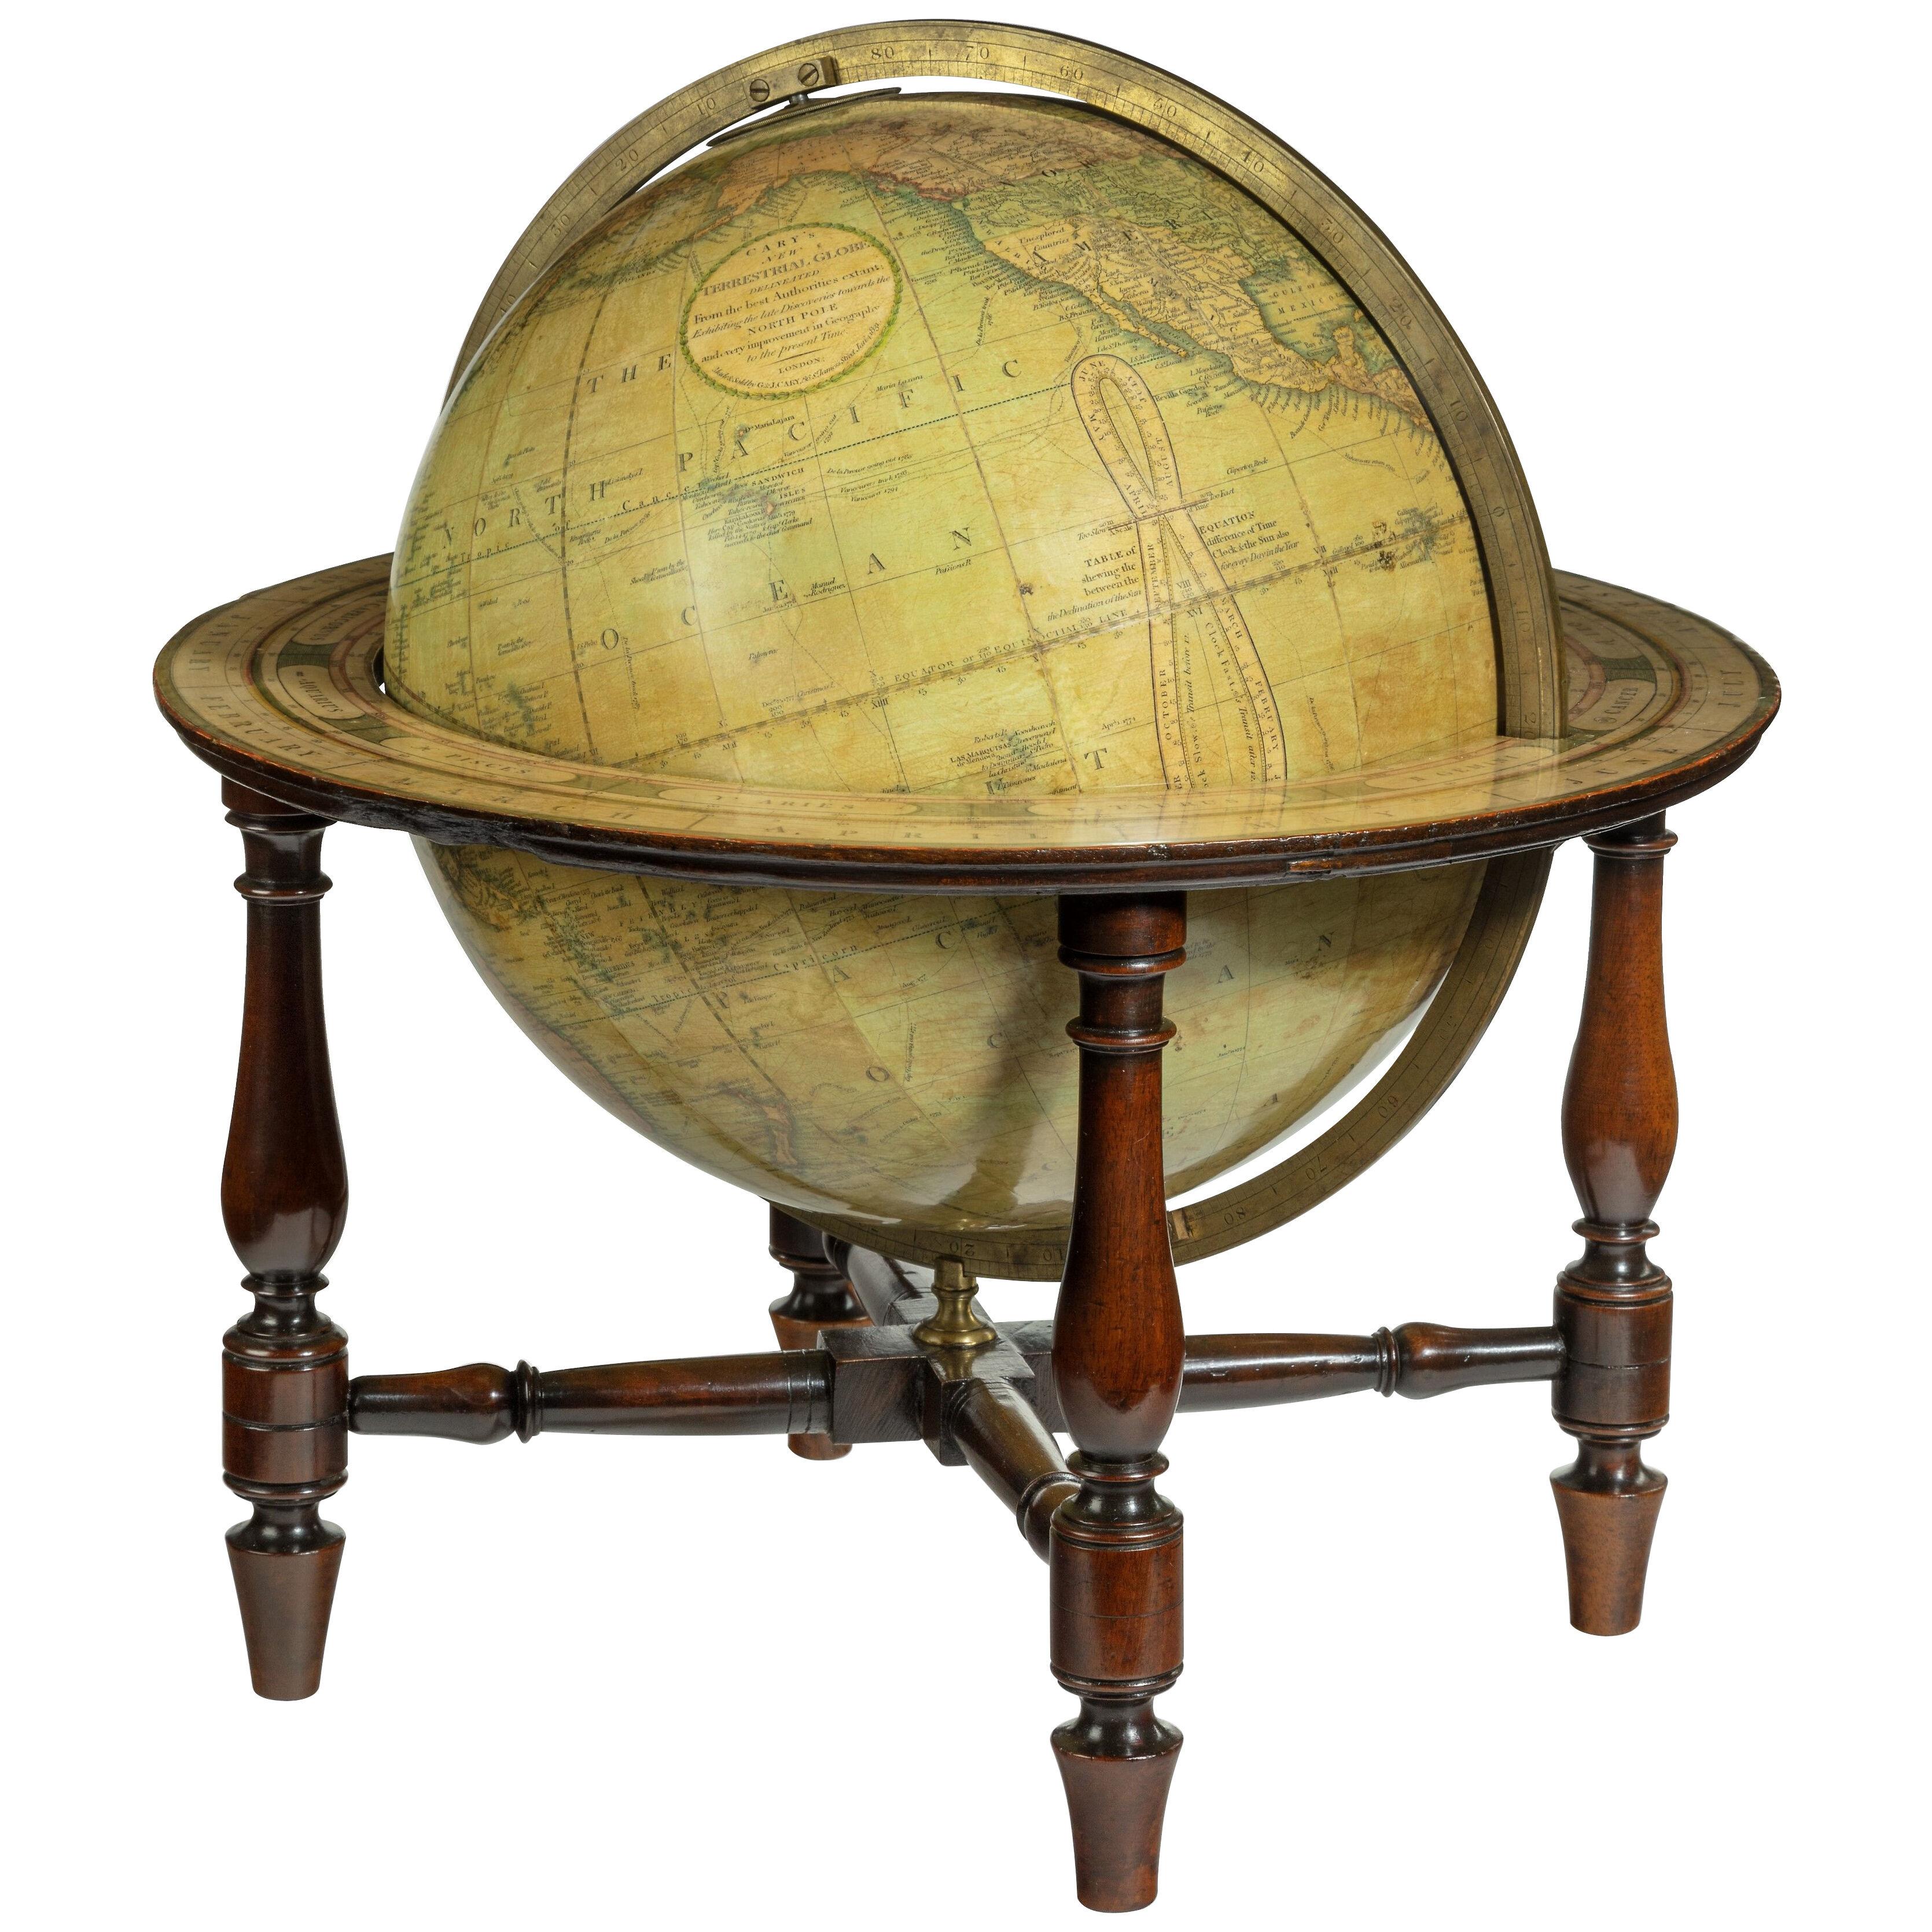 William IV 12 Inch Terrestrial Table Globe by G. & J. Cary